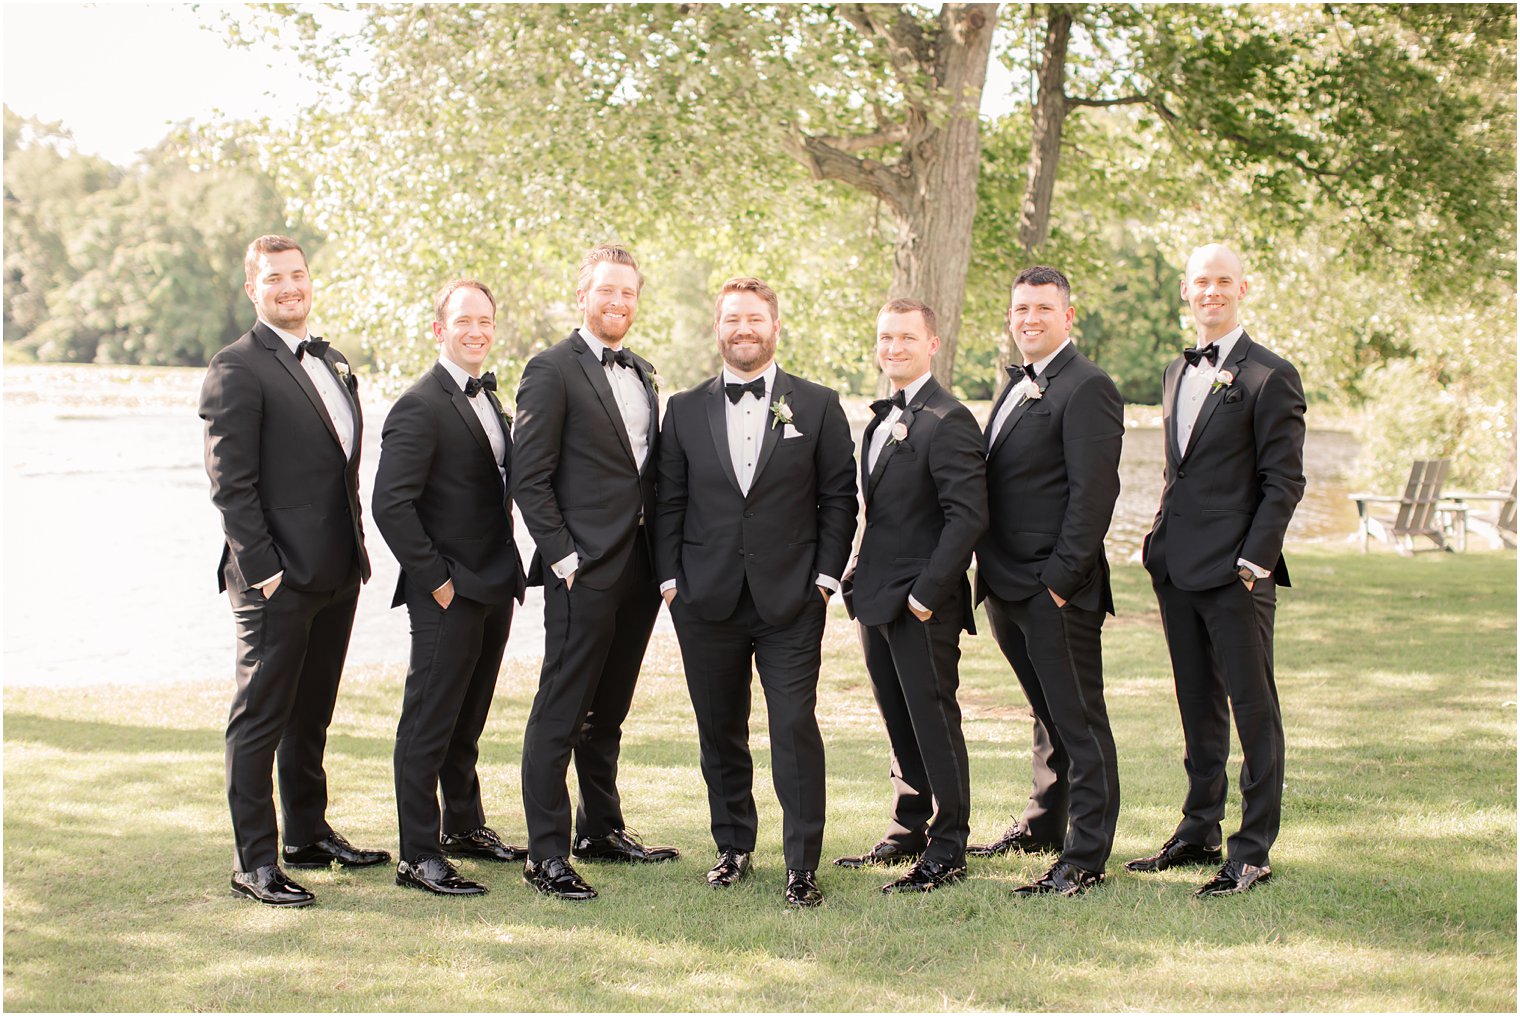 Groom and groomsmen in black tuxedos and bow ties